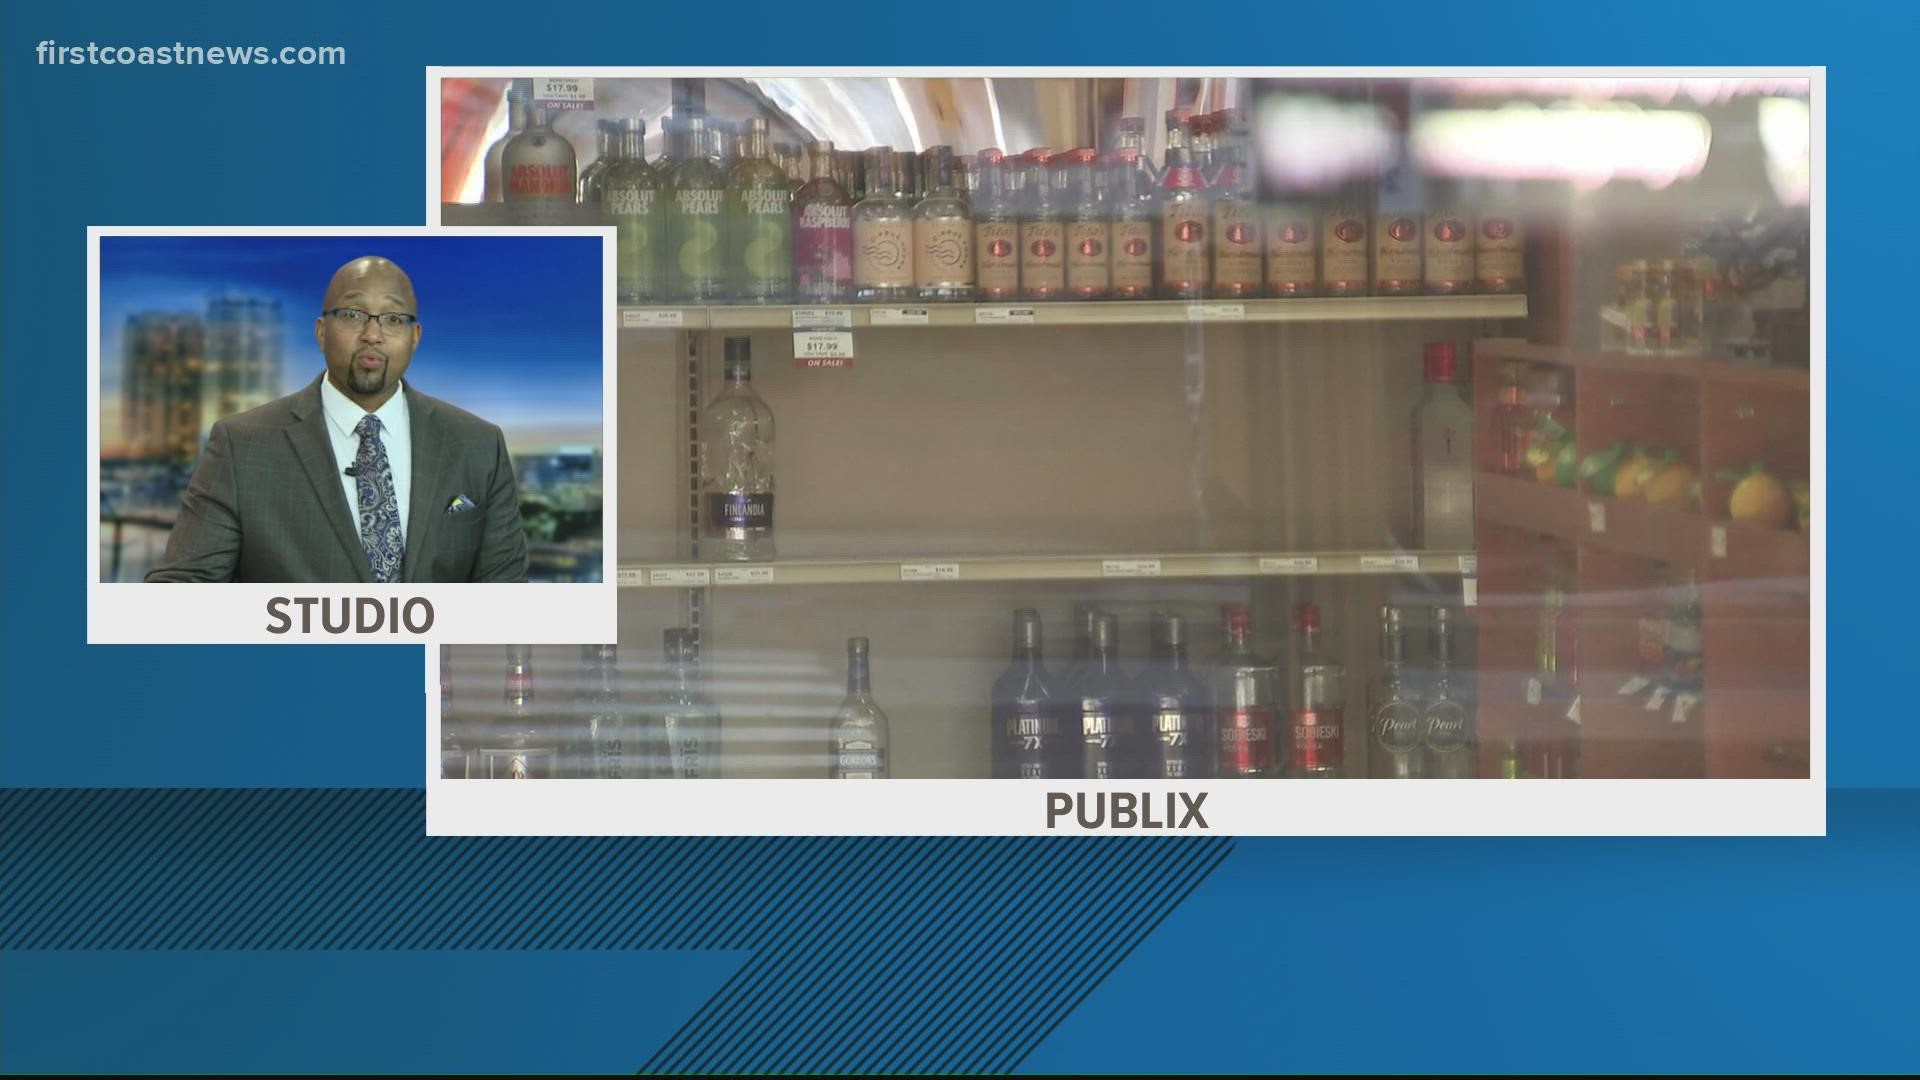 The company says Beluga, Ruskova, Russian Standard and Zyr have been removed from the store's liquor store shelves.